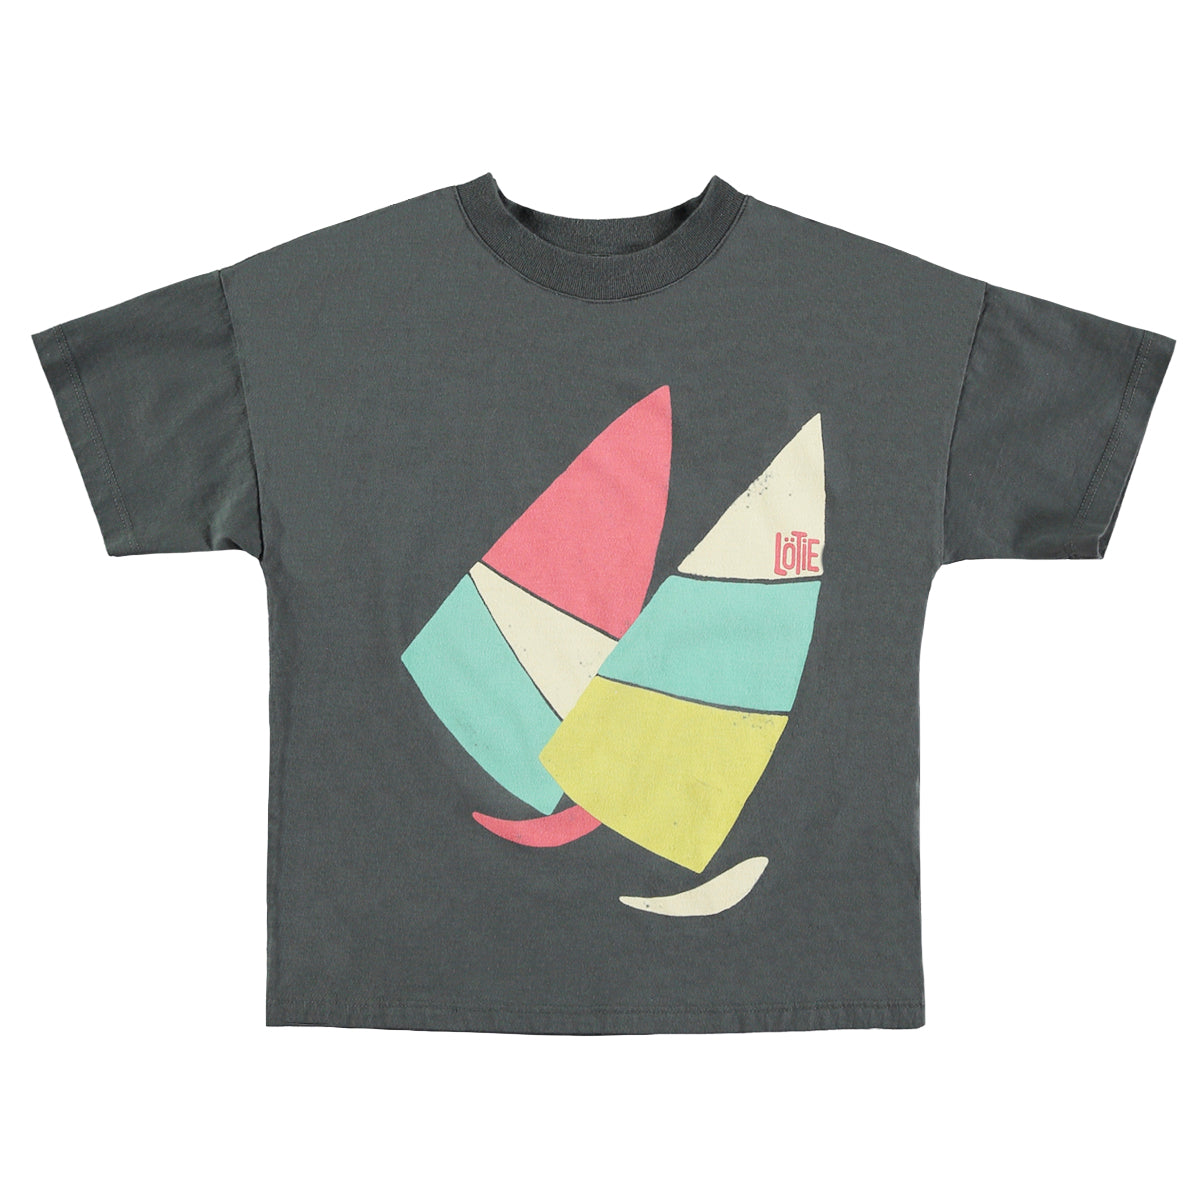 Lotie Kids - wide fit t-shirt - windsurf - anthracite